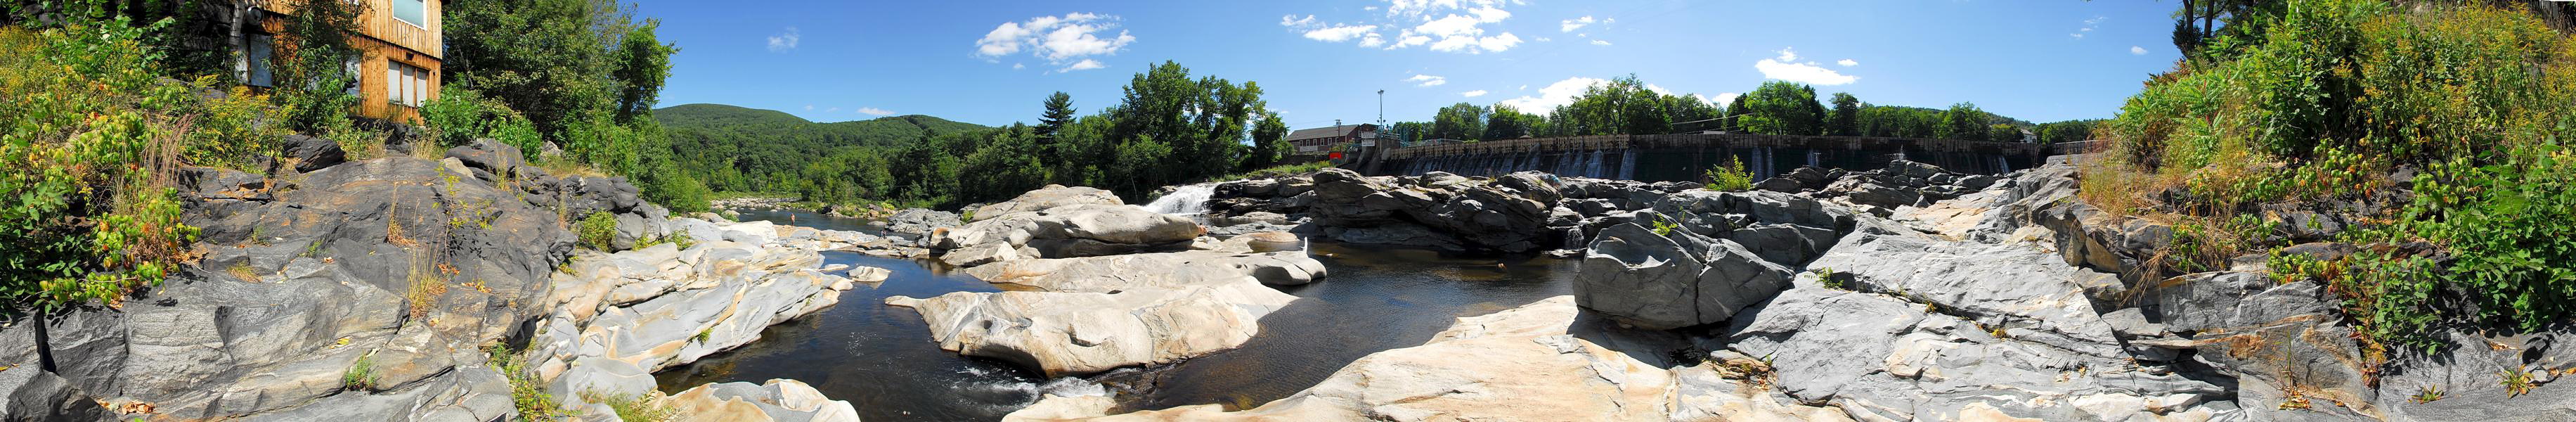 blue sky, panoramic, rocks, scenic landscape, trees, water